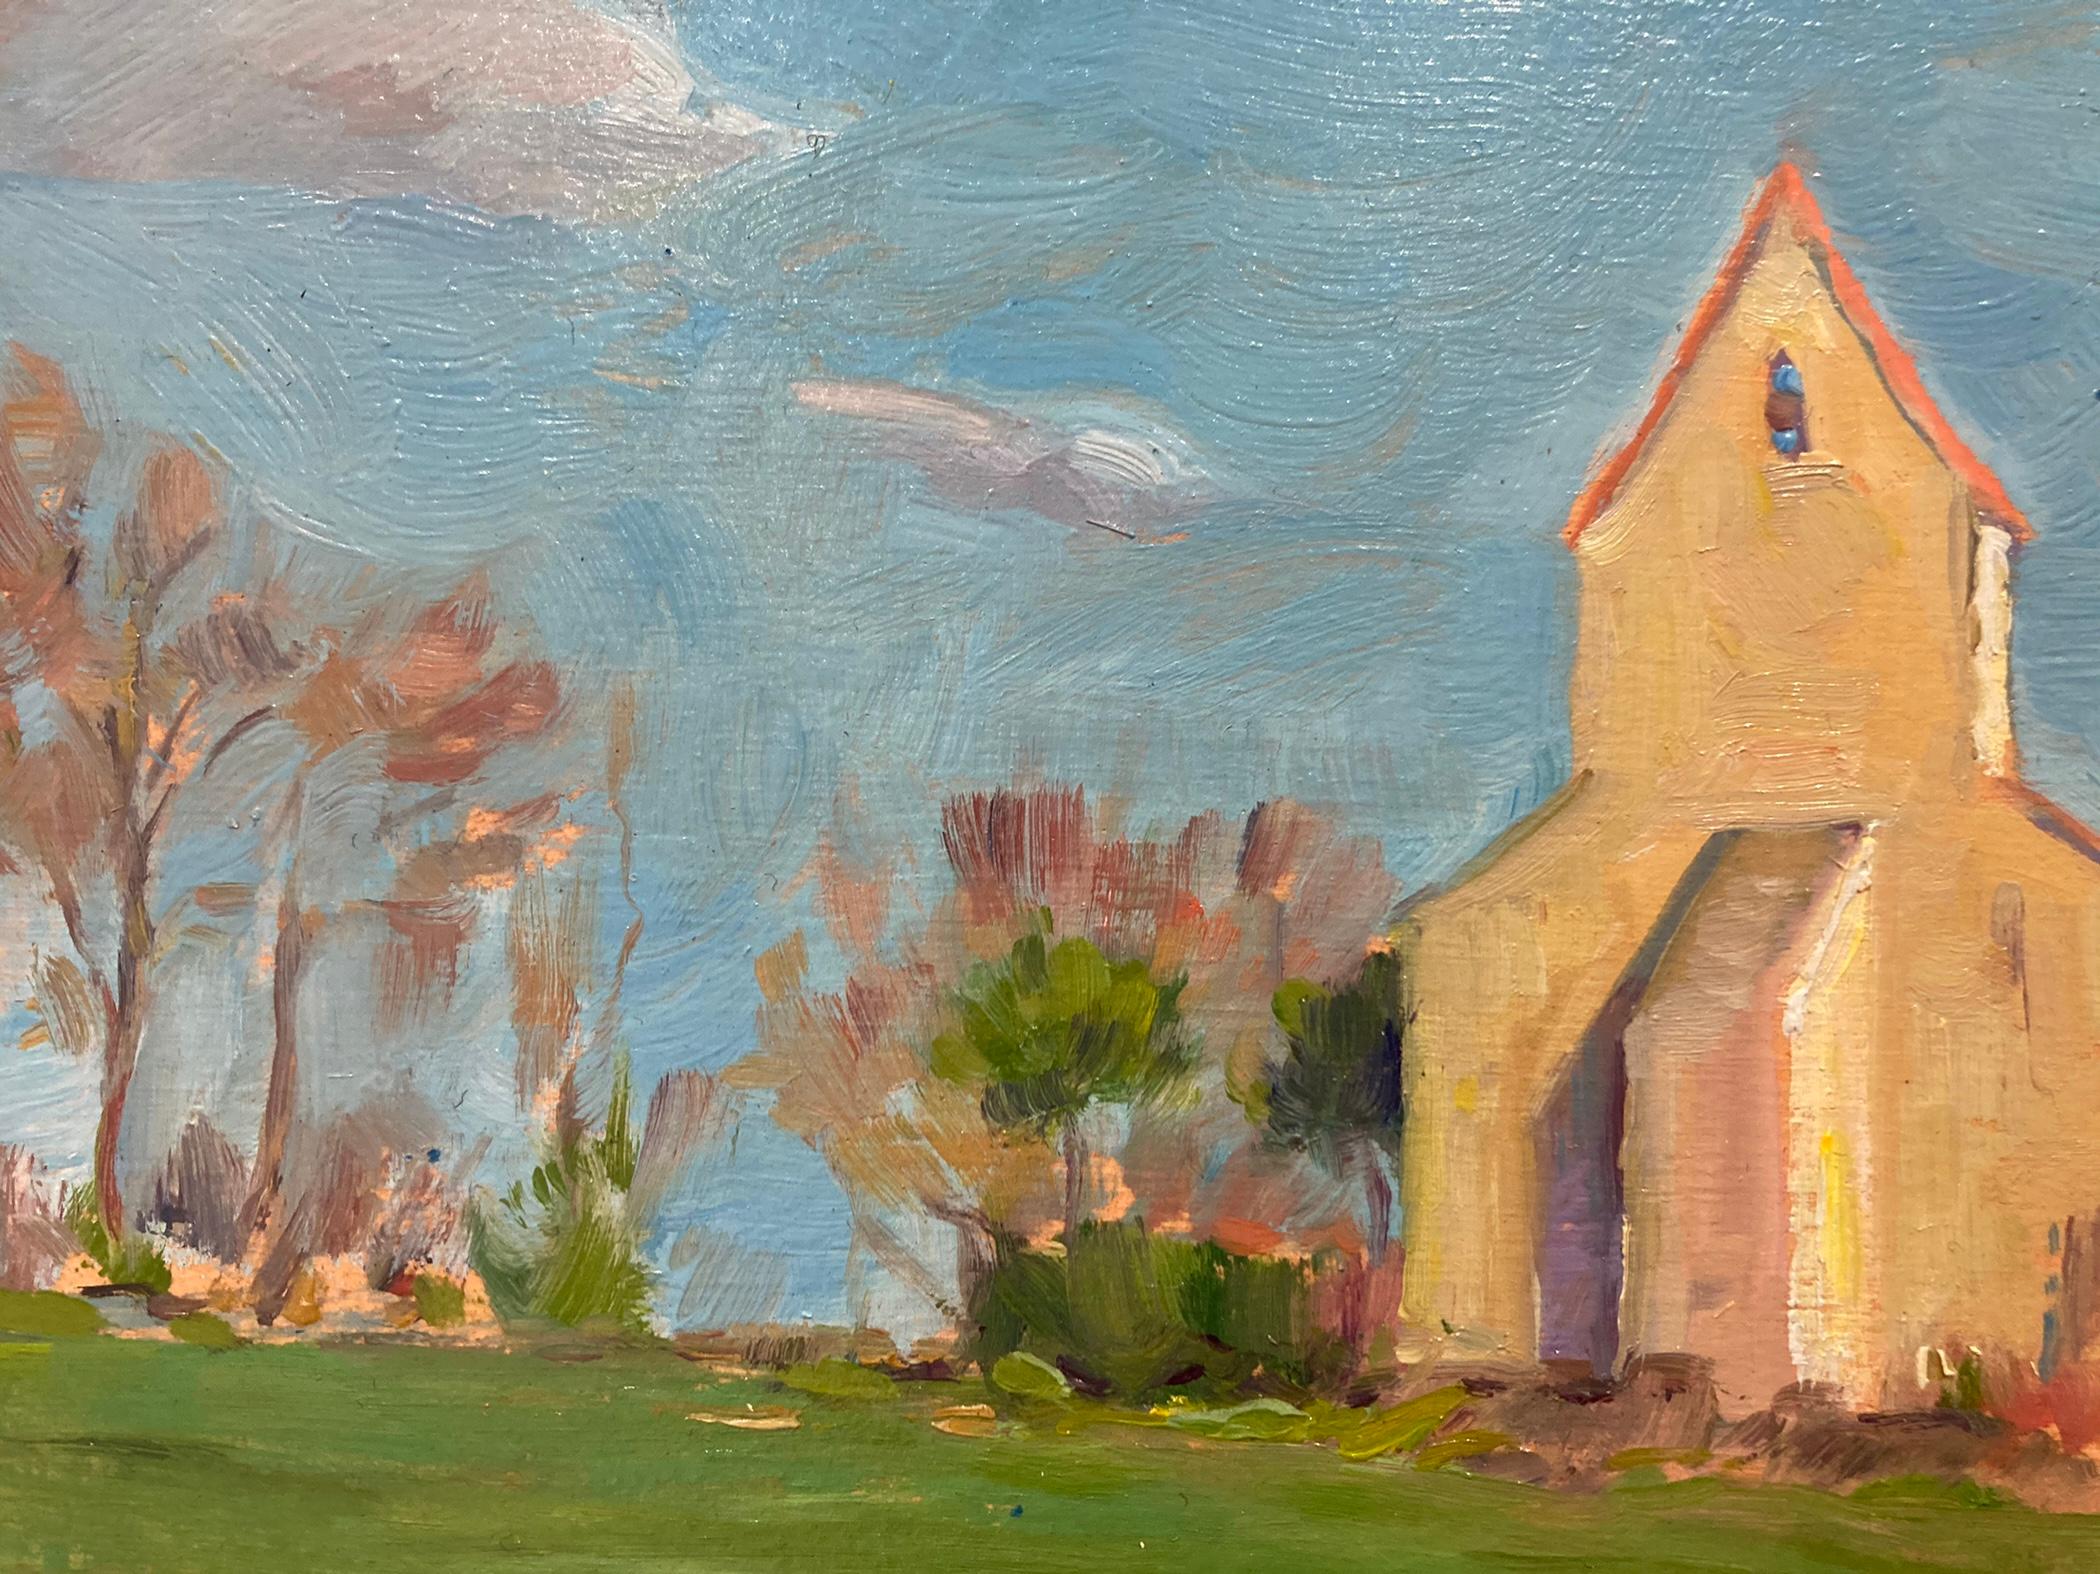 Orsolic Dalessio's sky seems to dance in this plein air painting. A line of healthy trees and foliage is interrupted by a tall church, and continue again on the other side with a different species of flora. The interplay of nature and architecture